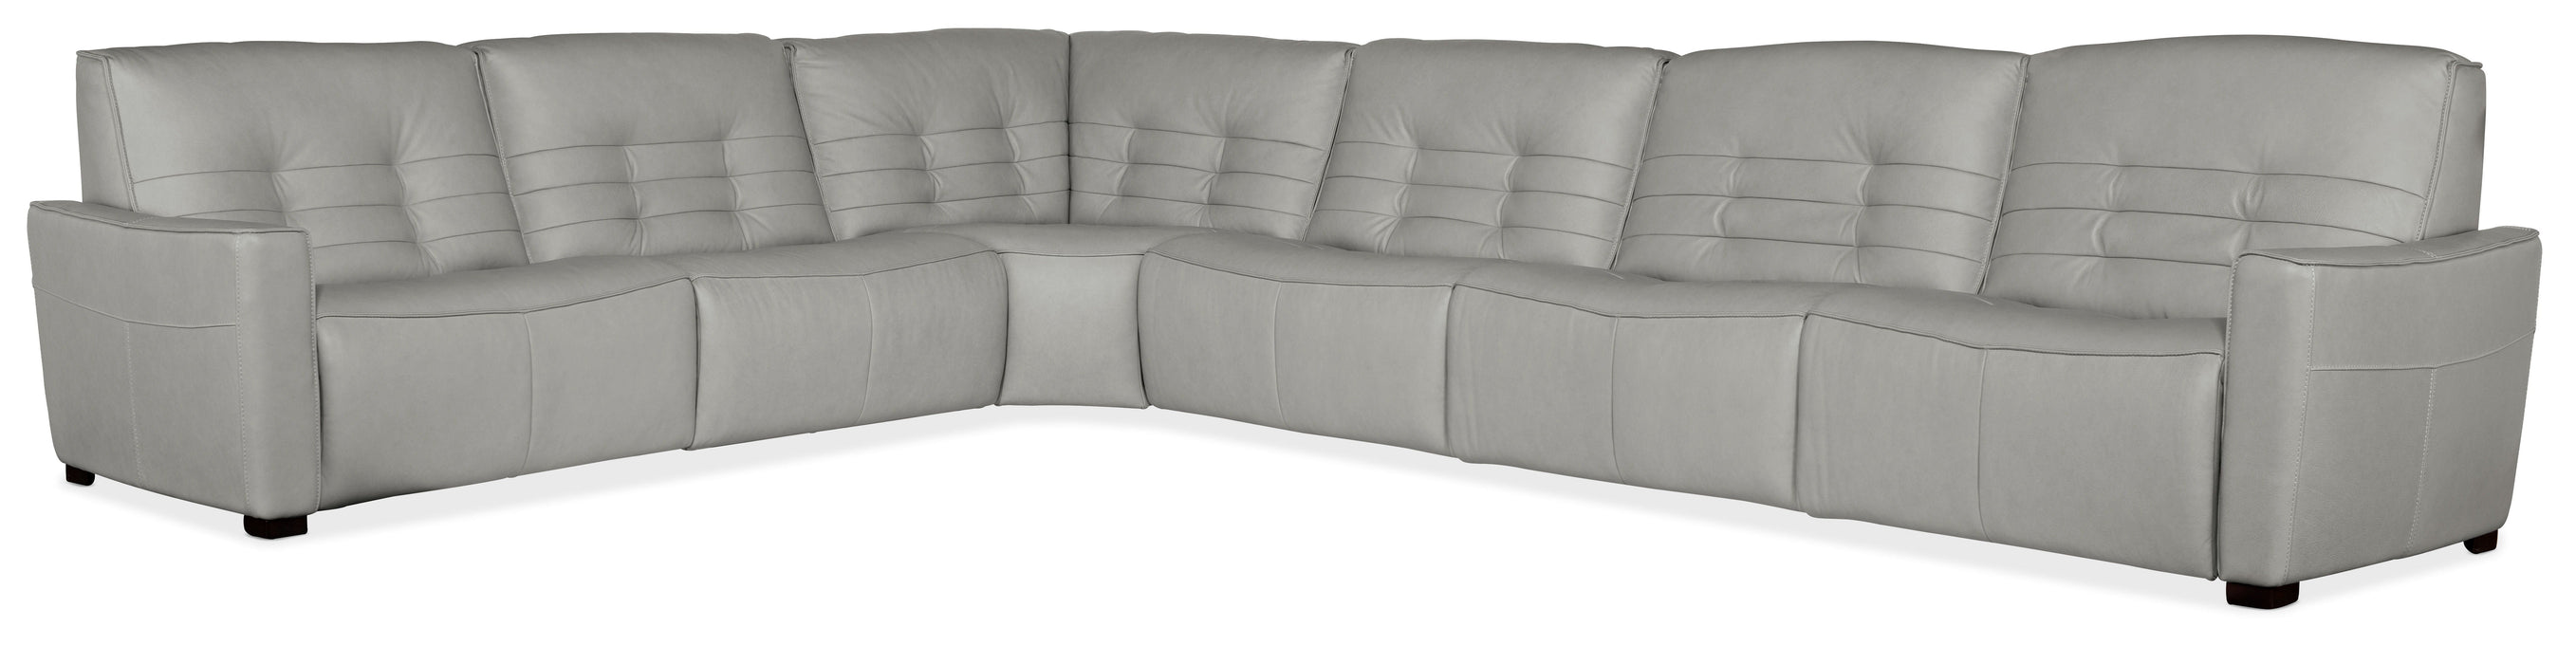 Reaux 6-Piece Power Recline Sectional With Power Recliners